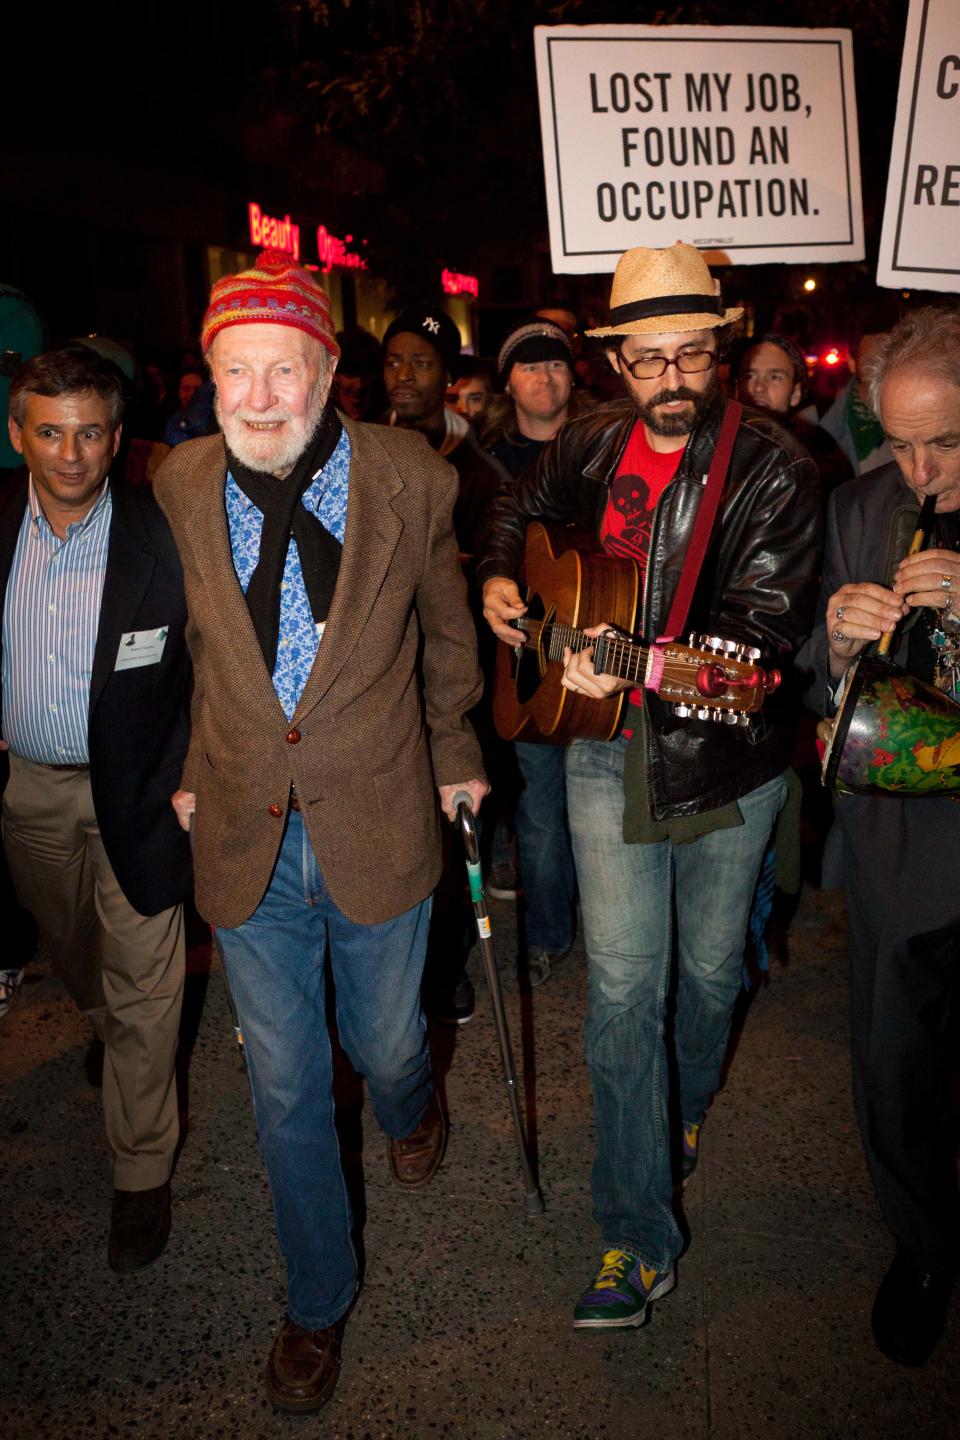 FILE - In this Oct. 21, 2011 file photo, activist and musician Pete Seeger, 92, foreground left, marches with nearly a thousand demonstrators sympathetic to the Occupy Wall Street protests for a brief acoustic concert in Columbus Circle in New York. Seeger died on Monday Jan. 27, 2014, at the age of 94. (AP Photo/John Minchillo, File)